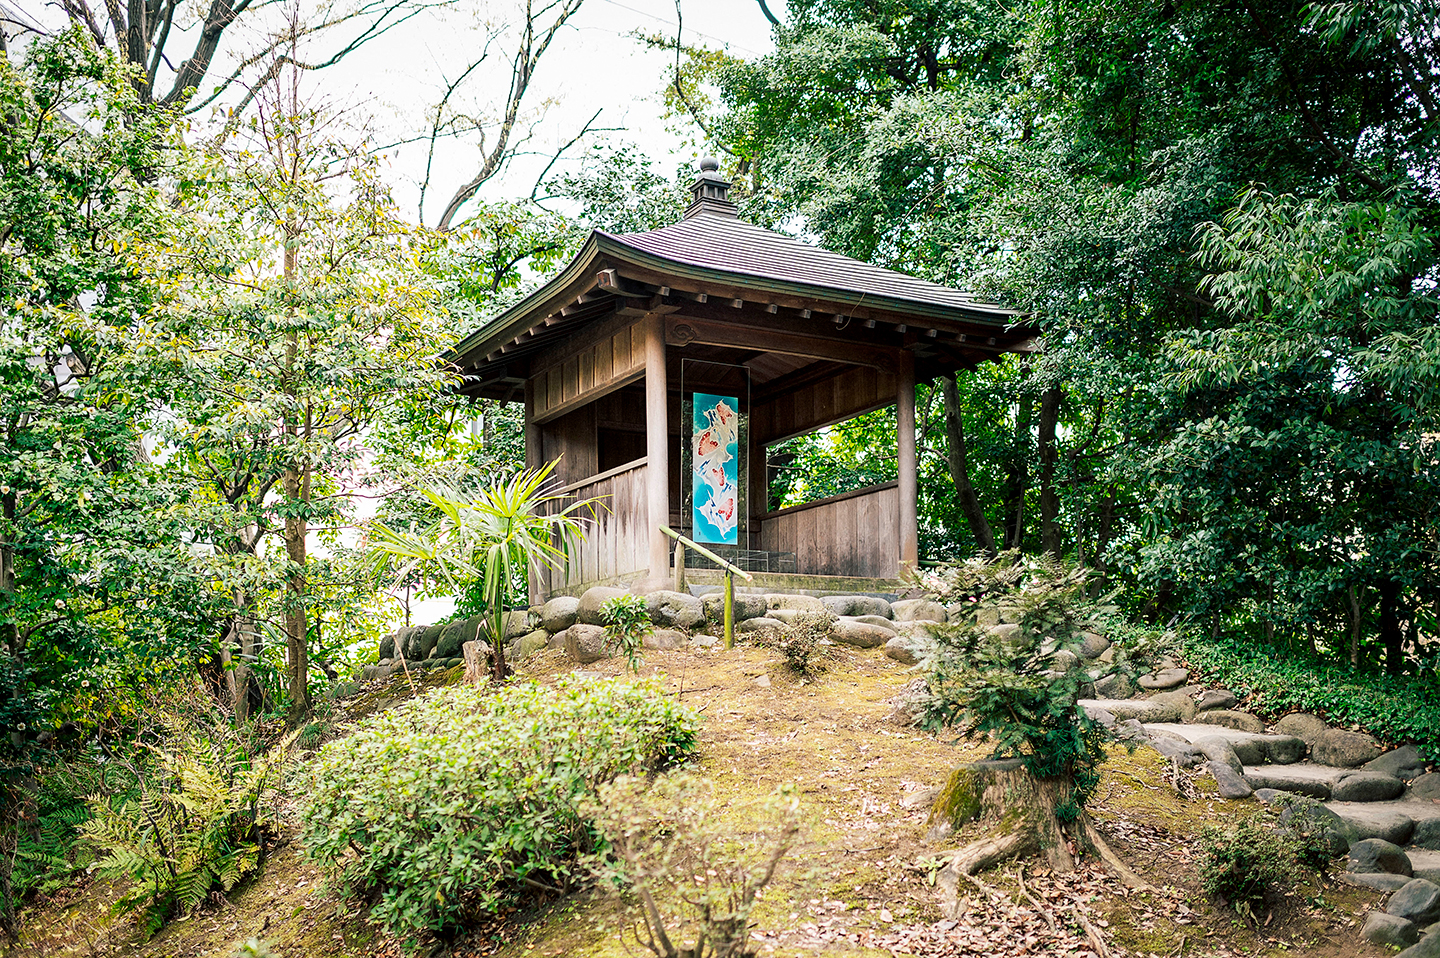 【EDO TOKYO RETHINK】Collaboration works of traditional crafts and contemporary art will be open to the public at Important Cultural Property Kyu-Iwasaki-tei Gardens.